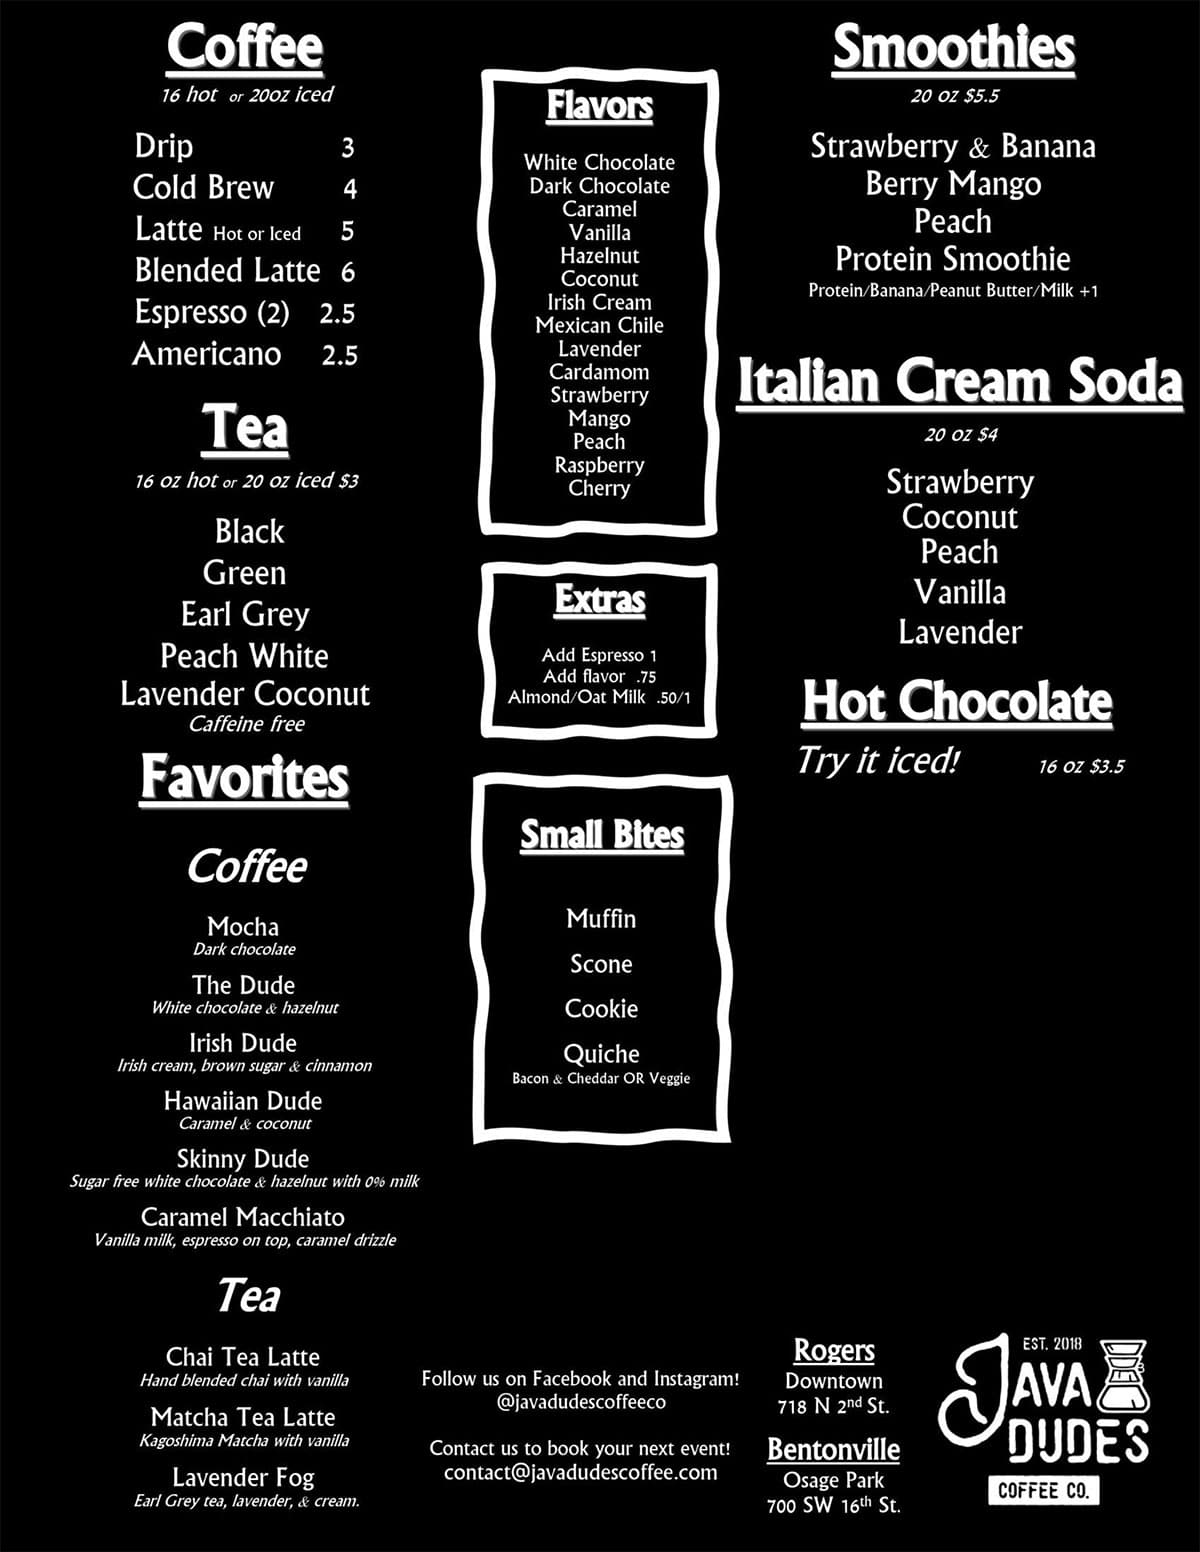 Java Dudes Coffee Co - Food Truck Menu with Prices